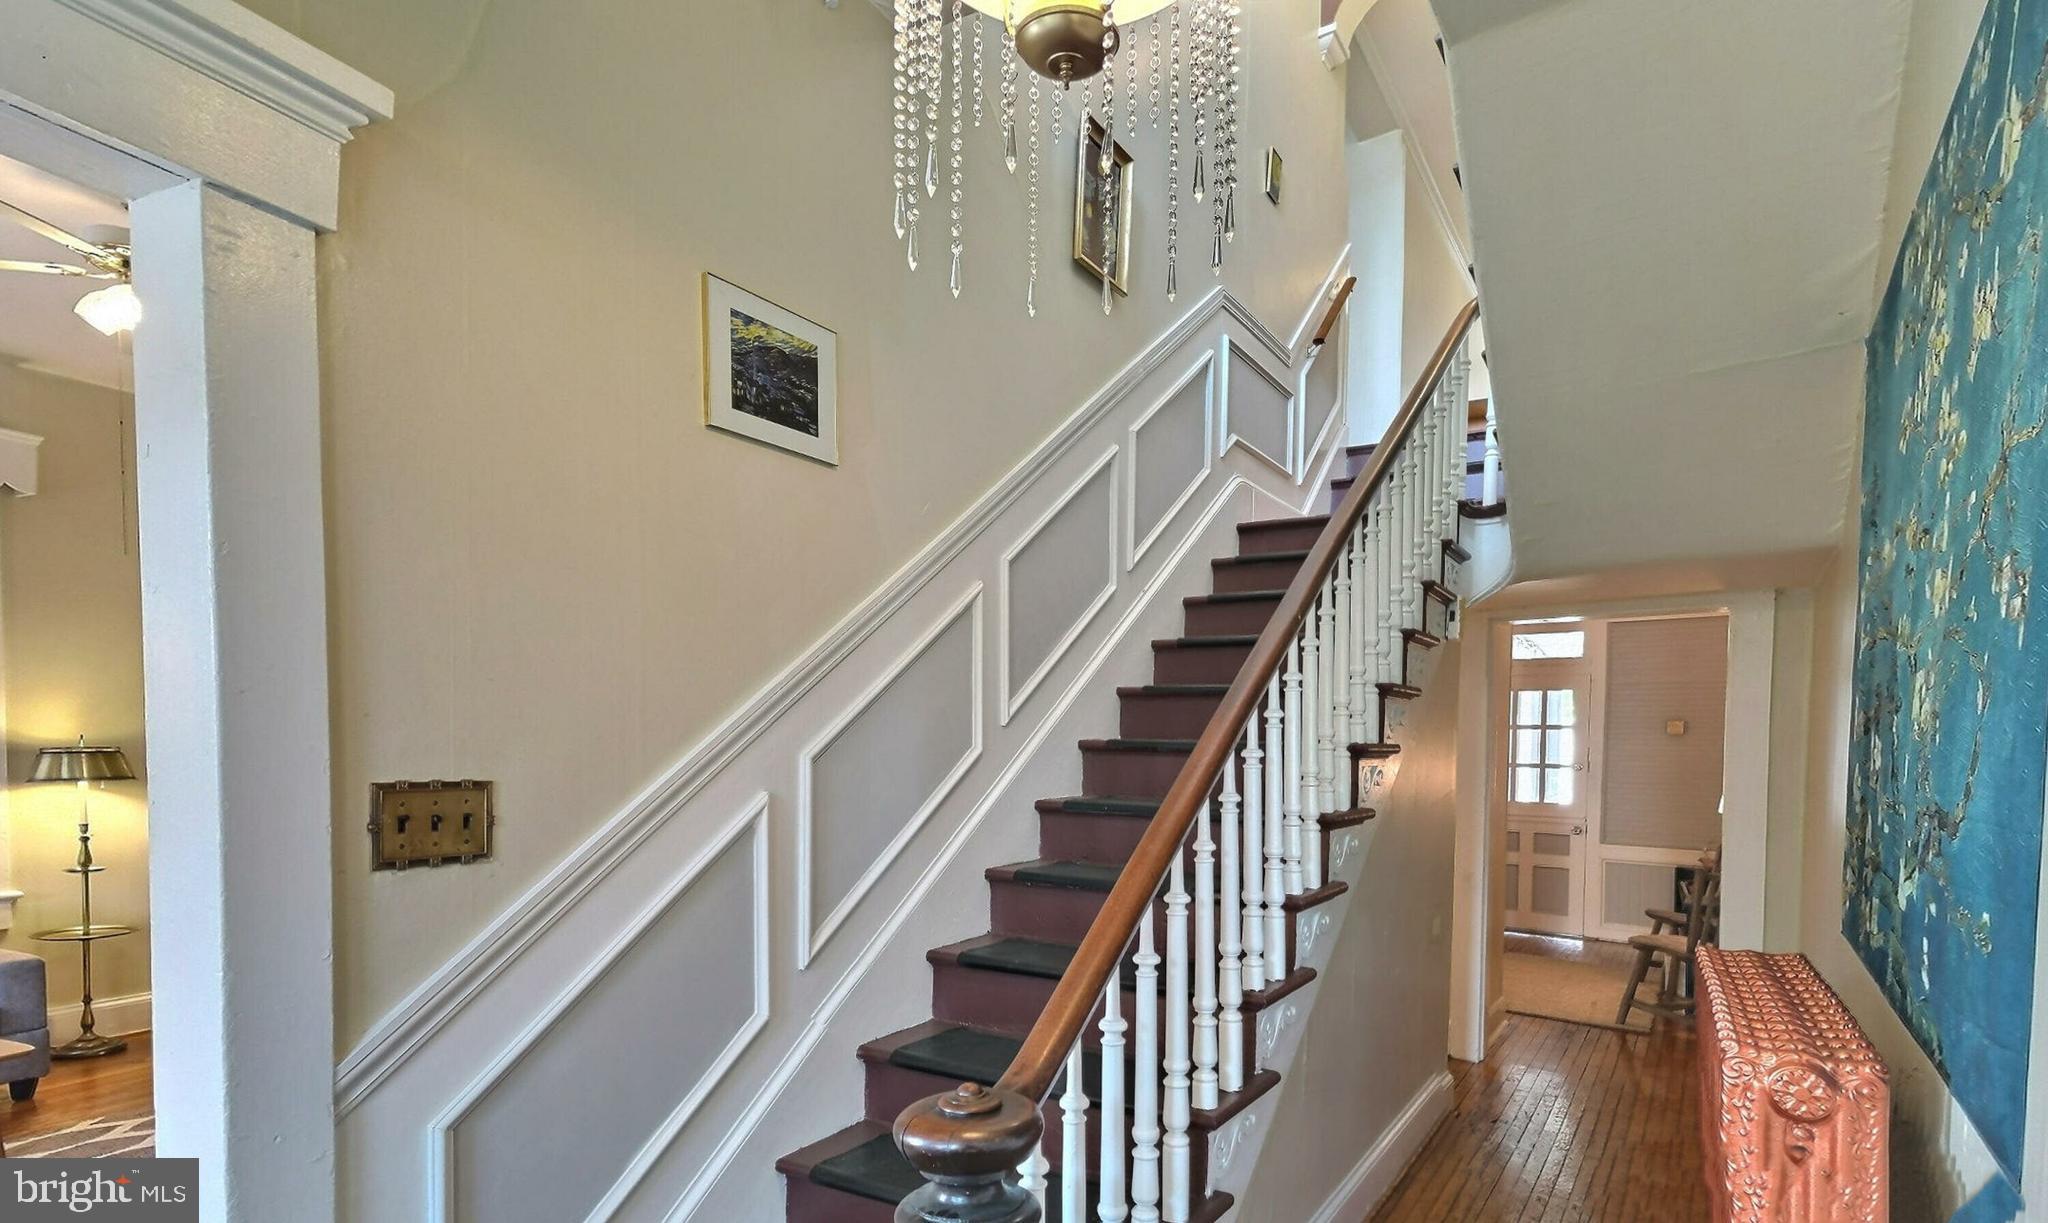 a view of staircase with lots of frames on wall and windows